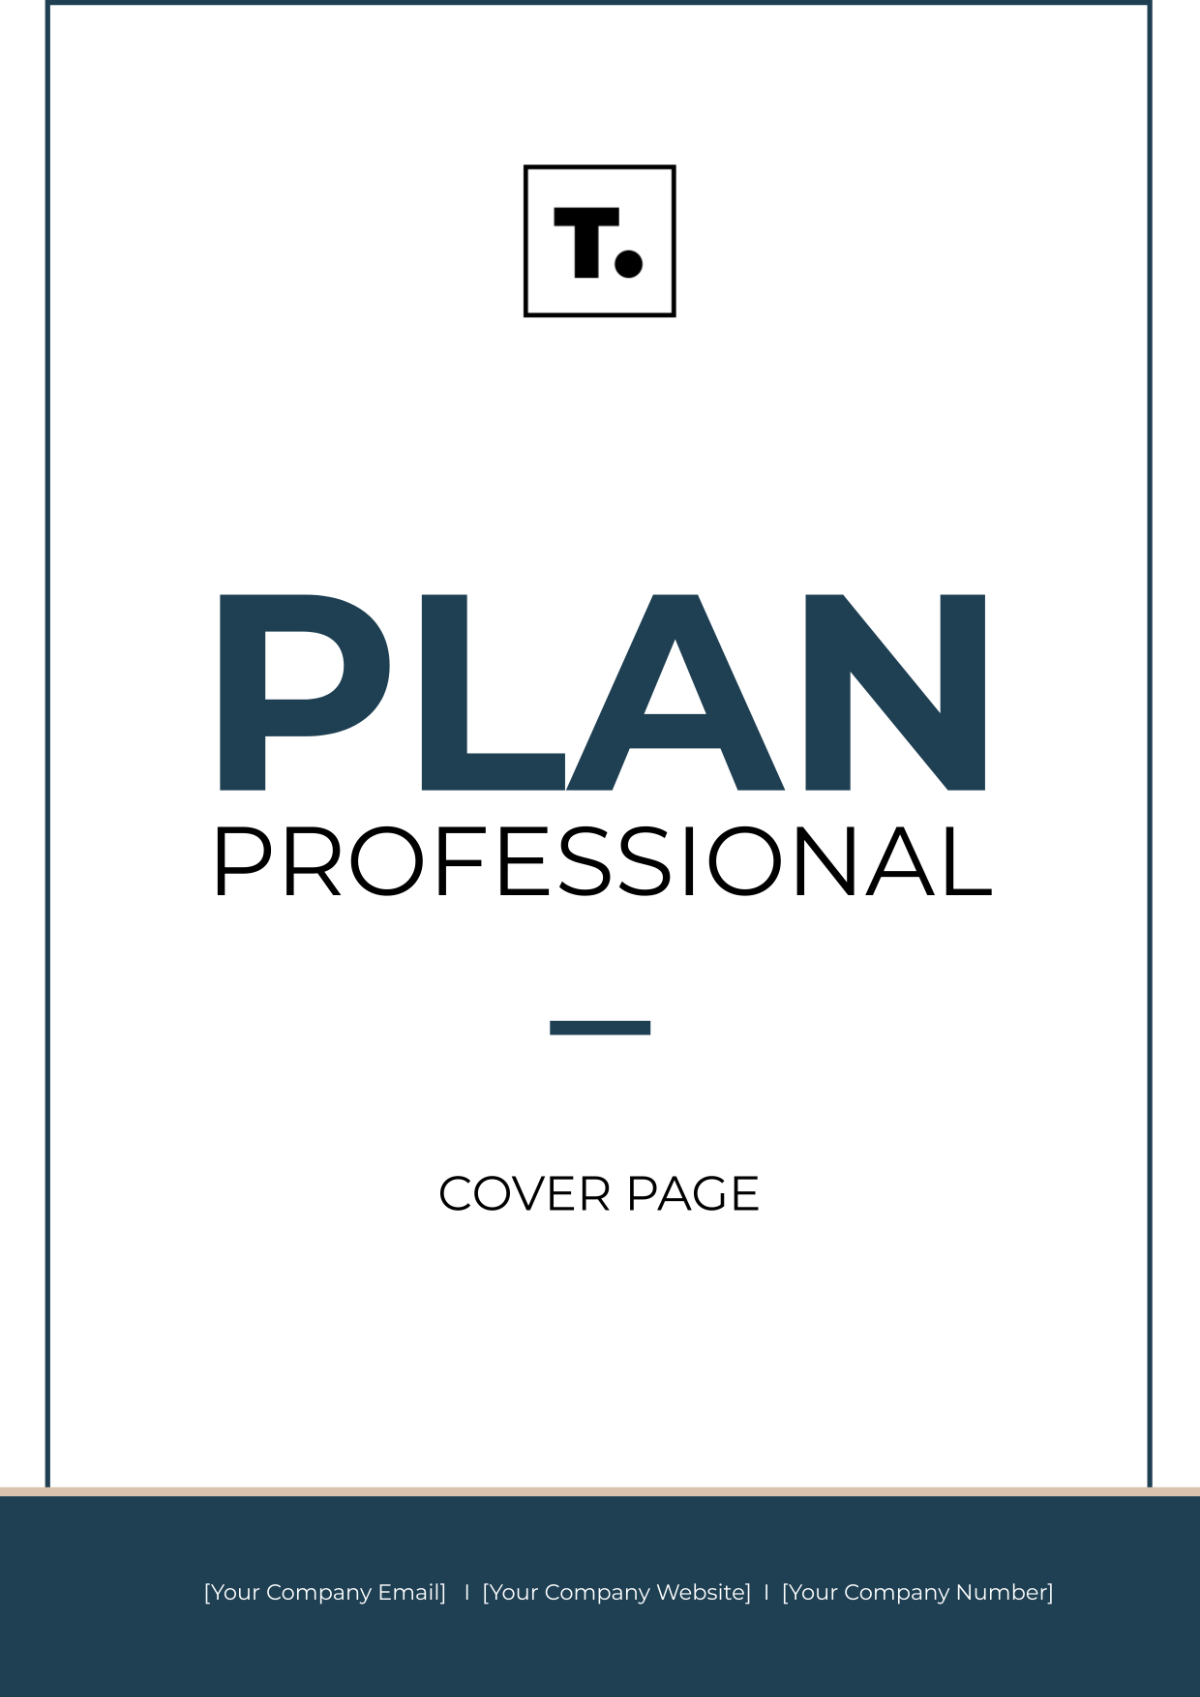 Plan Professional Cover Page